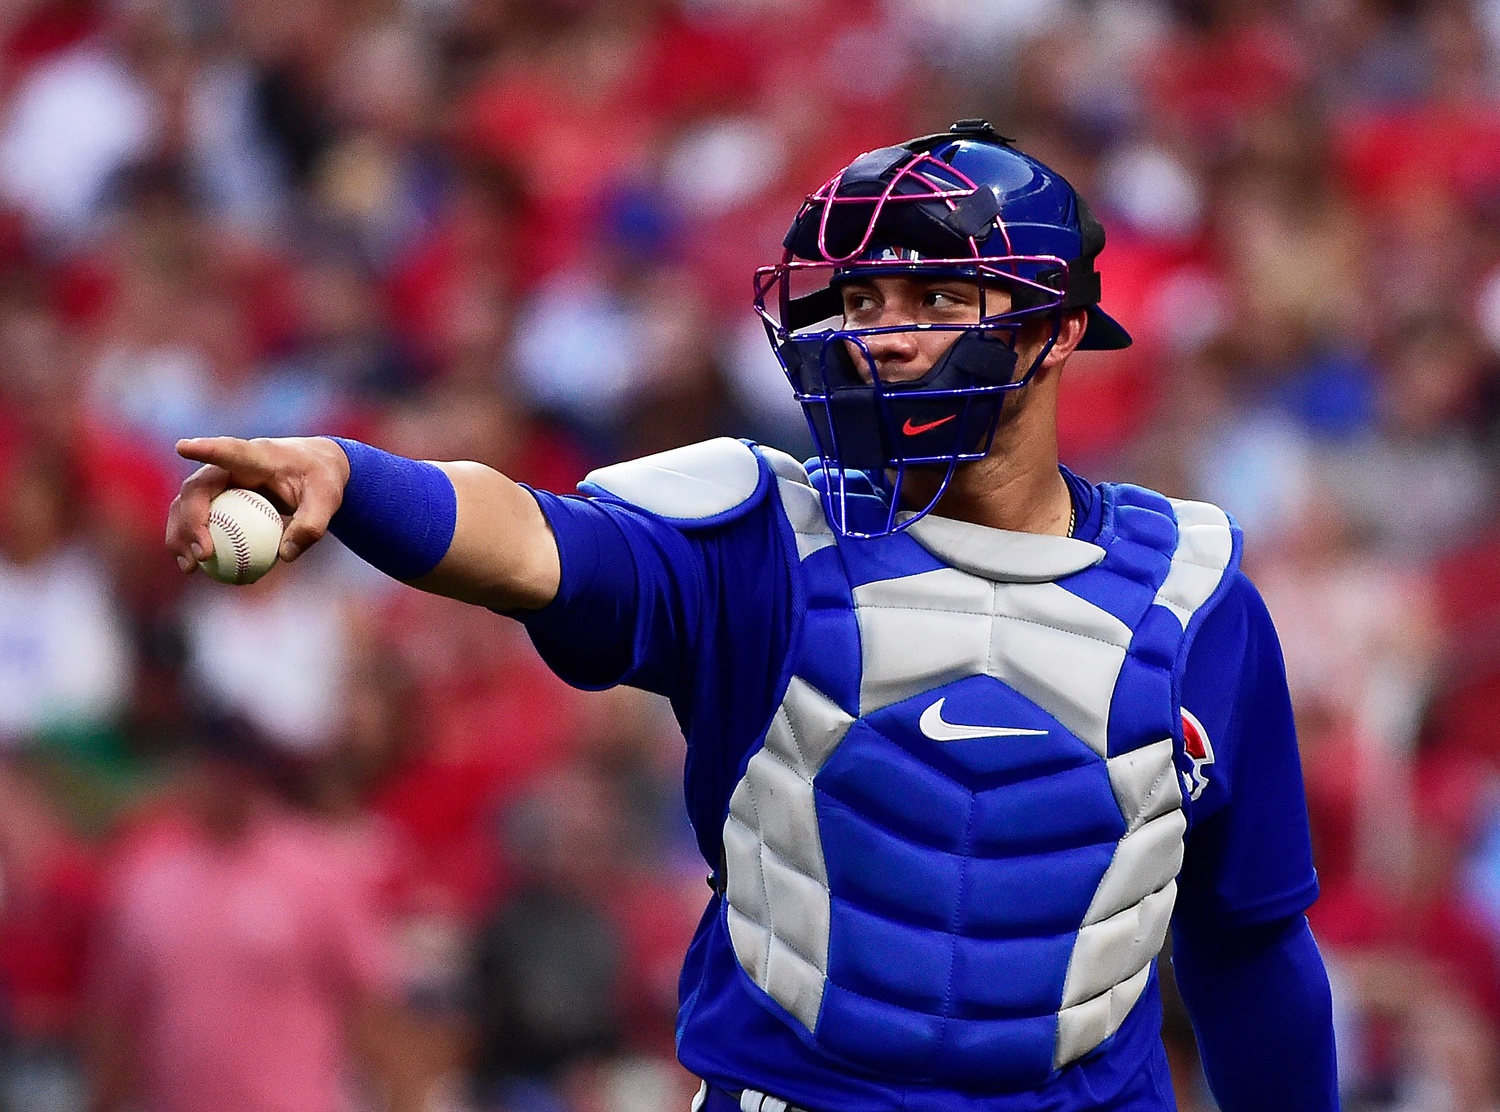 Bernie: Cardinals Go Big in Signing Willson Contreras to Begin a New Era in  Catching - Scoops